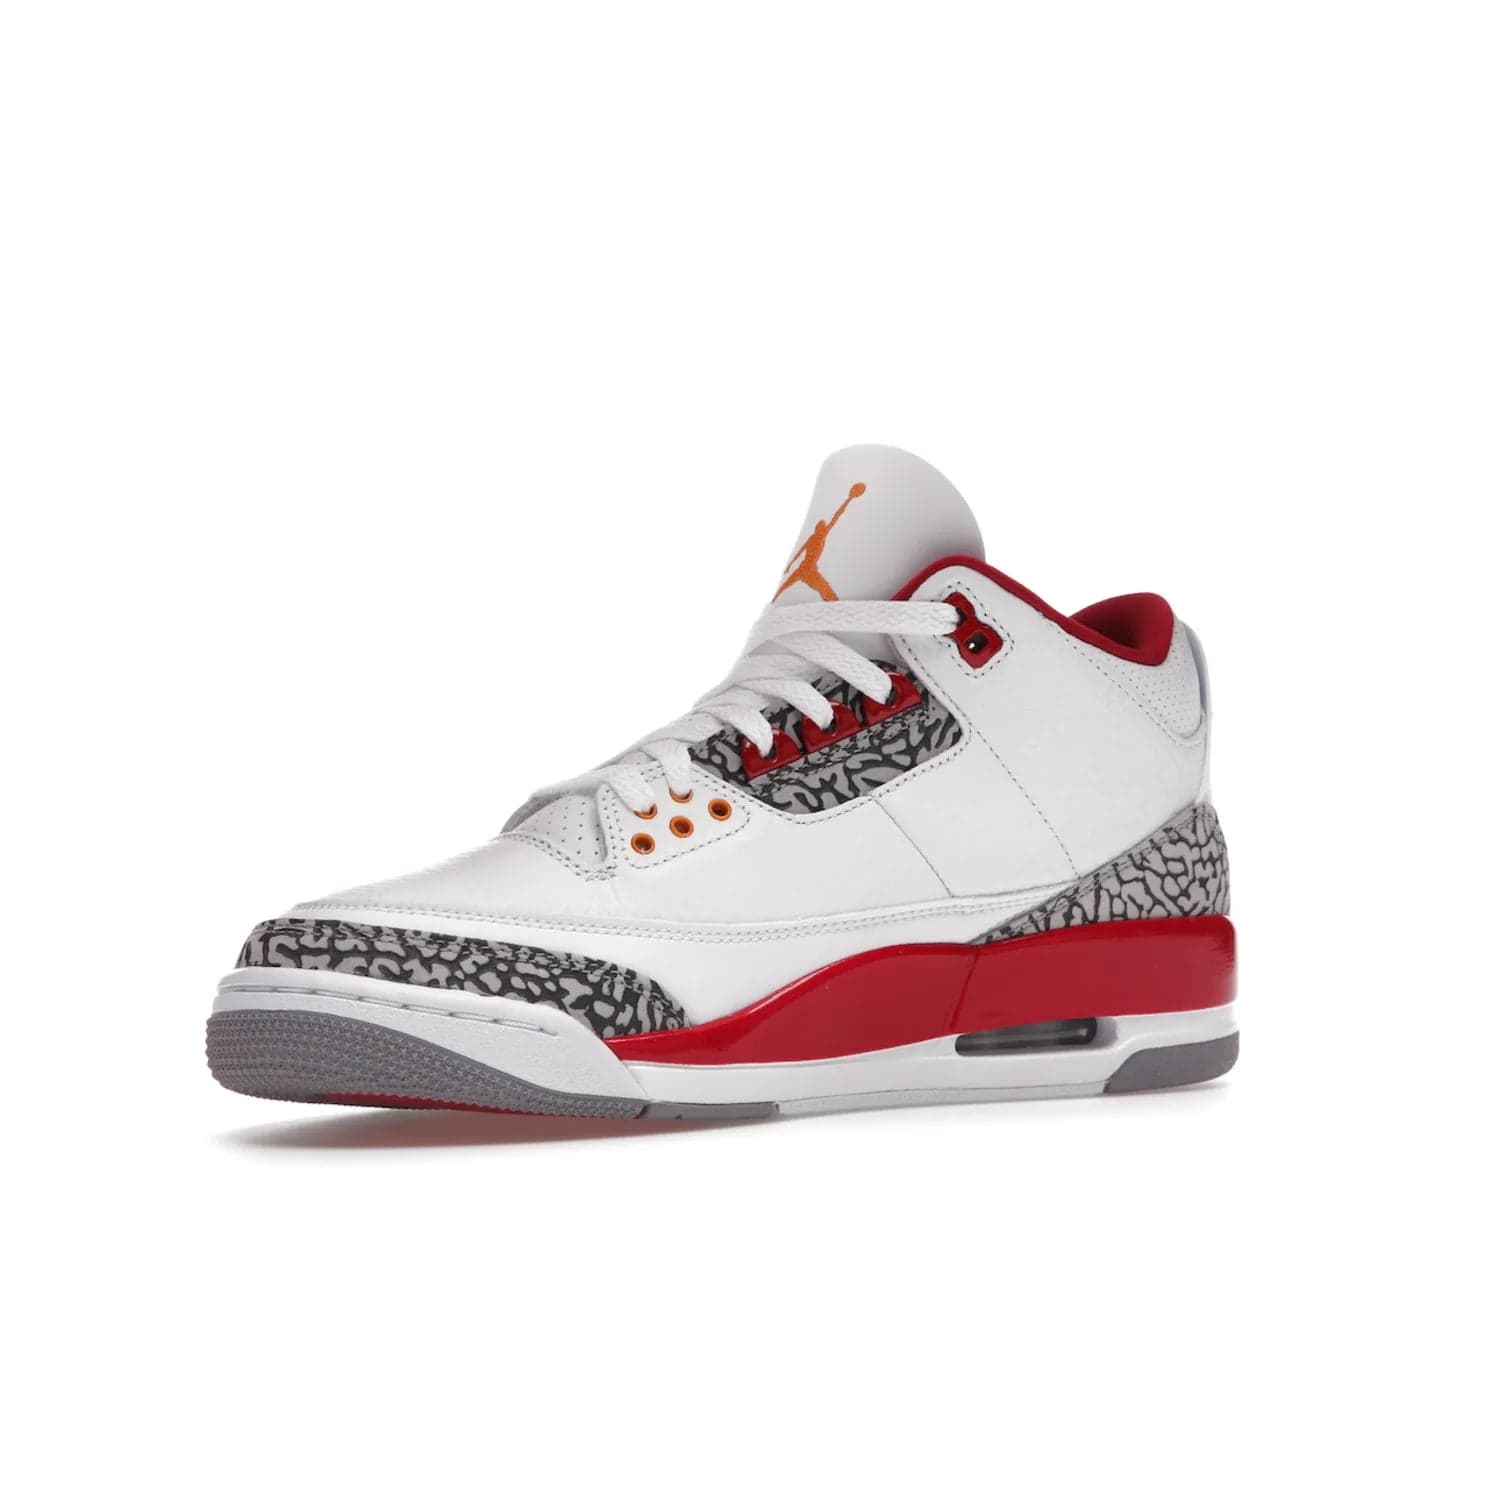 Jordan 3 Retro Cardinal Red - Image 16 - Only at www.BallersClubKickz.com - Air Jordan 3 Retro Cardinal Red combines classic style and modern appeal - white tumbled leather, signature Elephant Print overlays, cardinal red midsoles, Jumpman logo embroidery. Available Feb 2022.